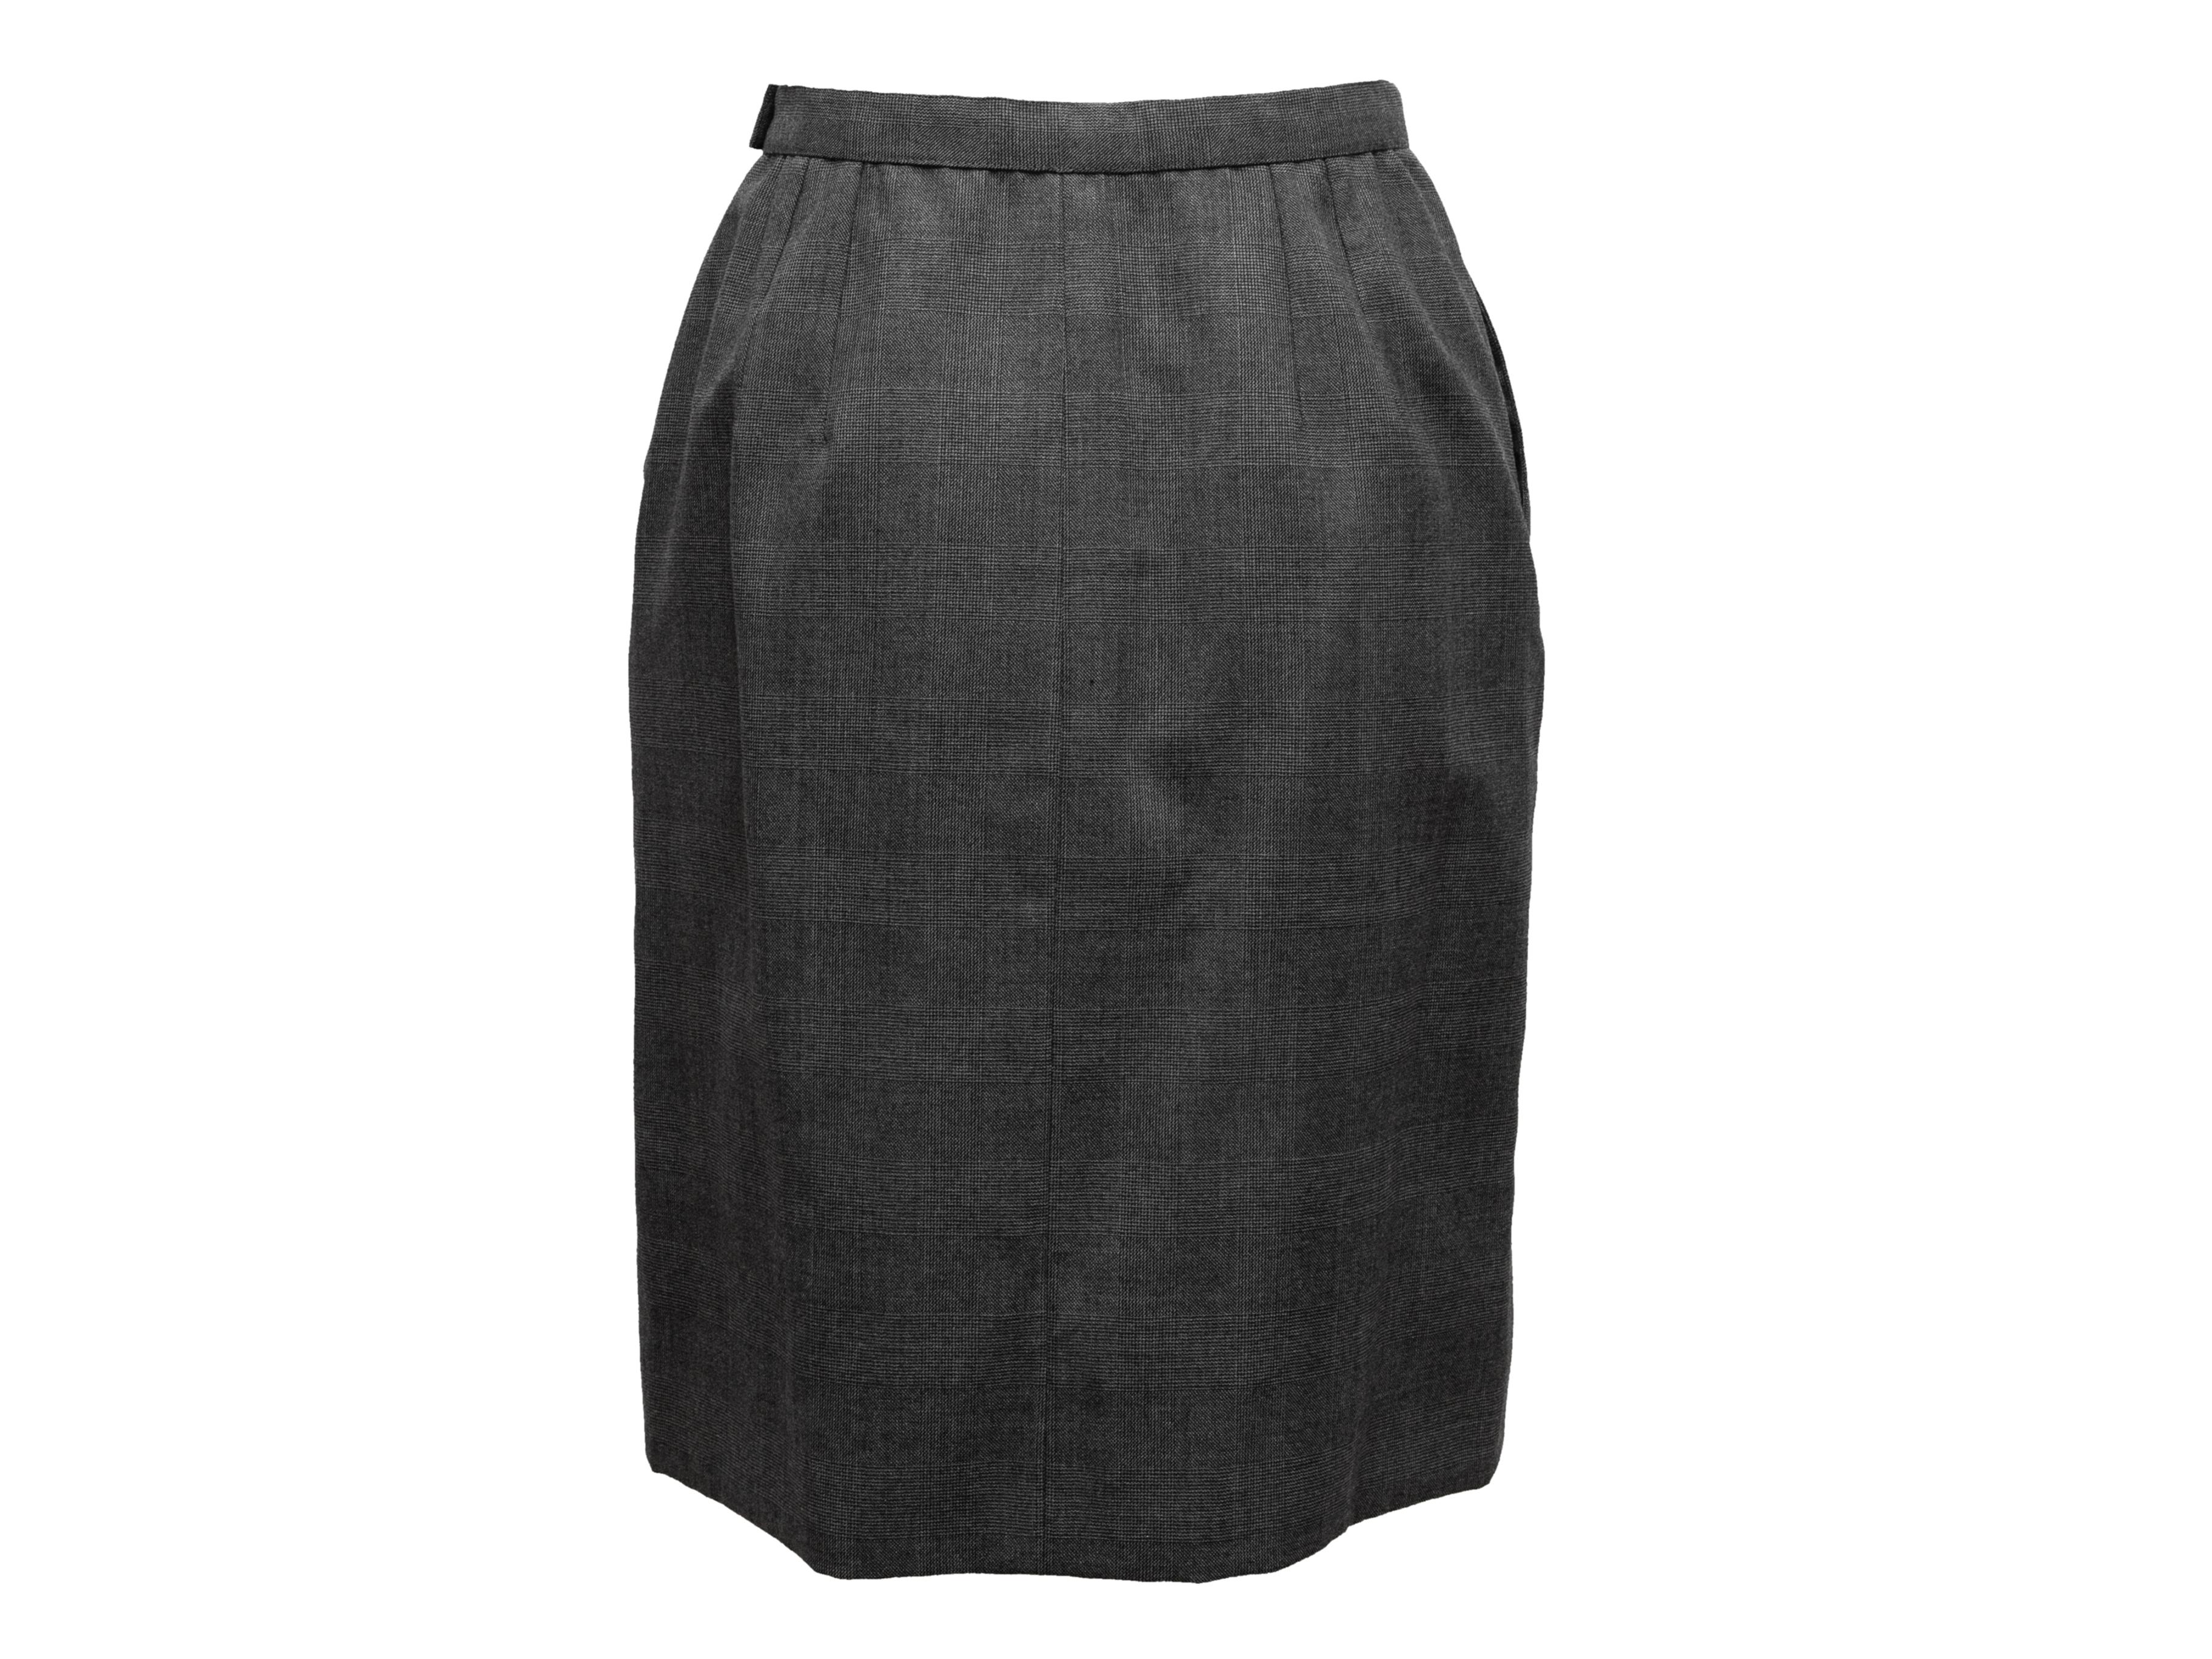 Vintage Grey Chanel 1970s Wool Pencil Skirt Size US XS In Excellent Condition For Sale In New York, NY